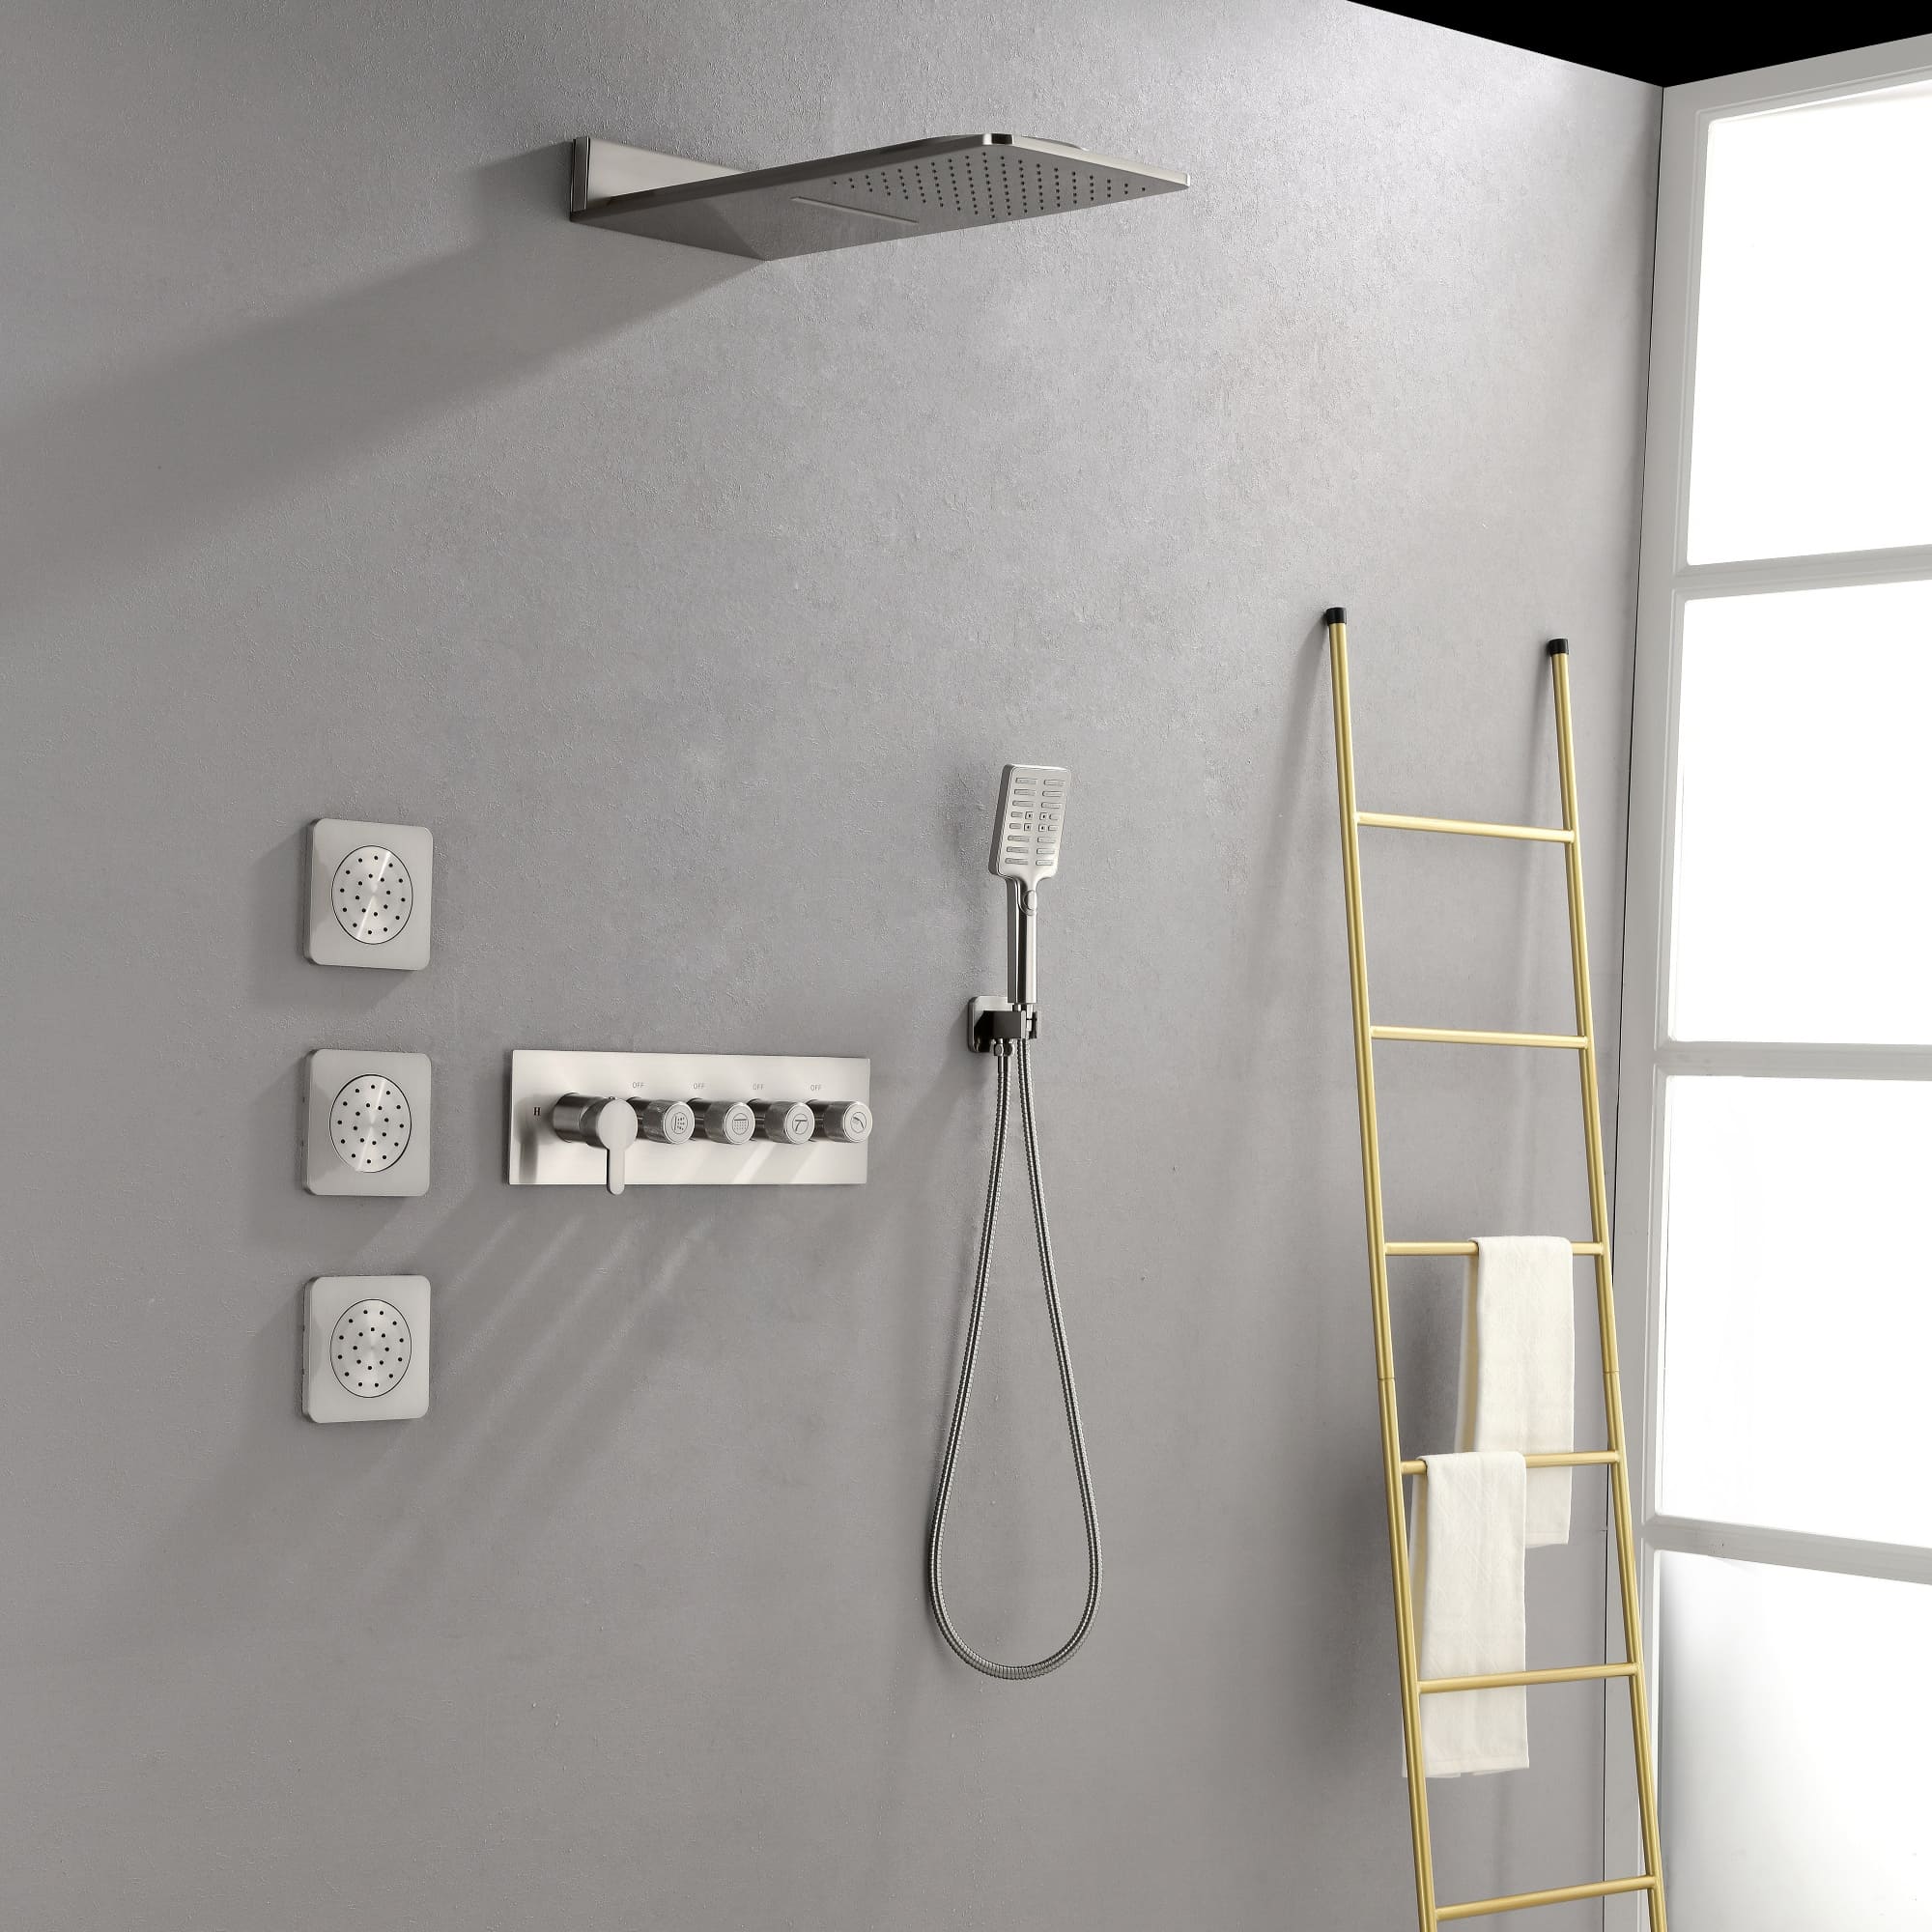 Boyel Living Luxury Thermostatic Rain Shower Head System With 3 Body Jets & 3-Spray Patterns Wall Mounted and Solid Brass Handshower-Boyel Living